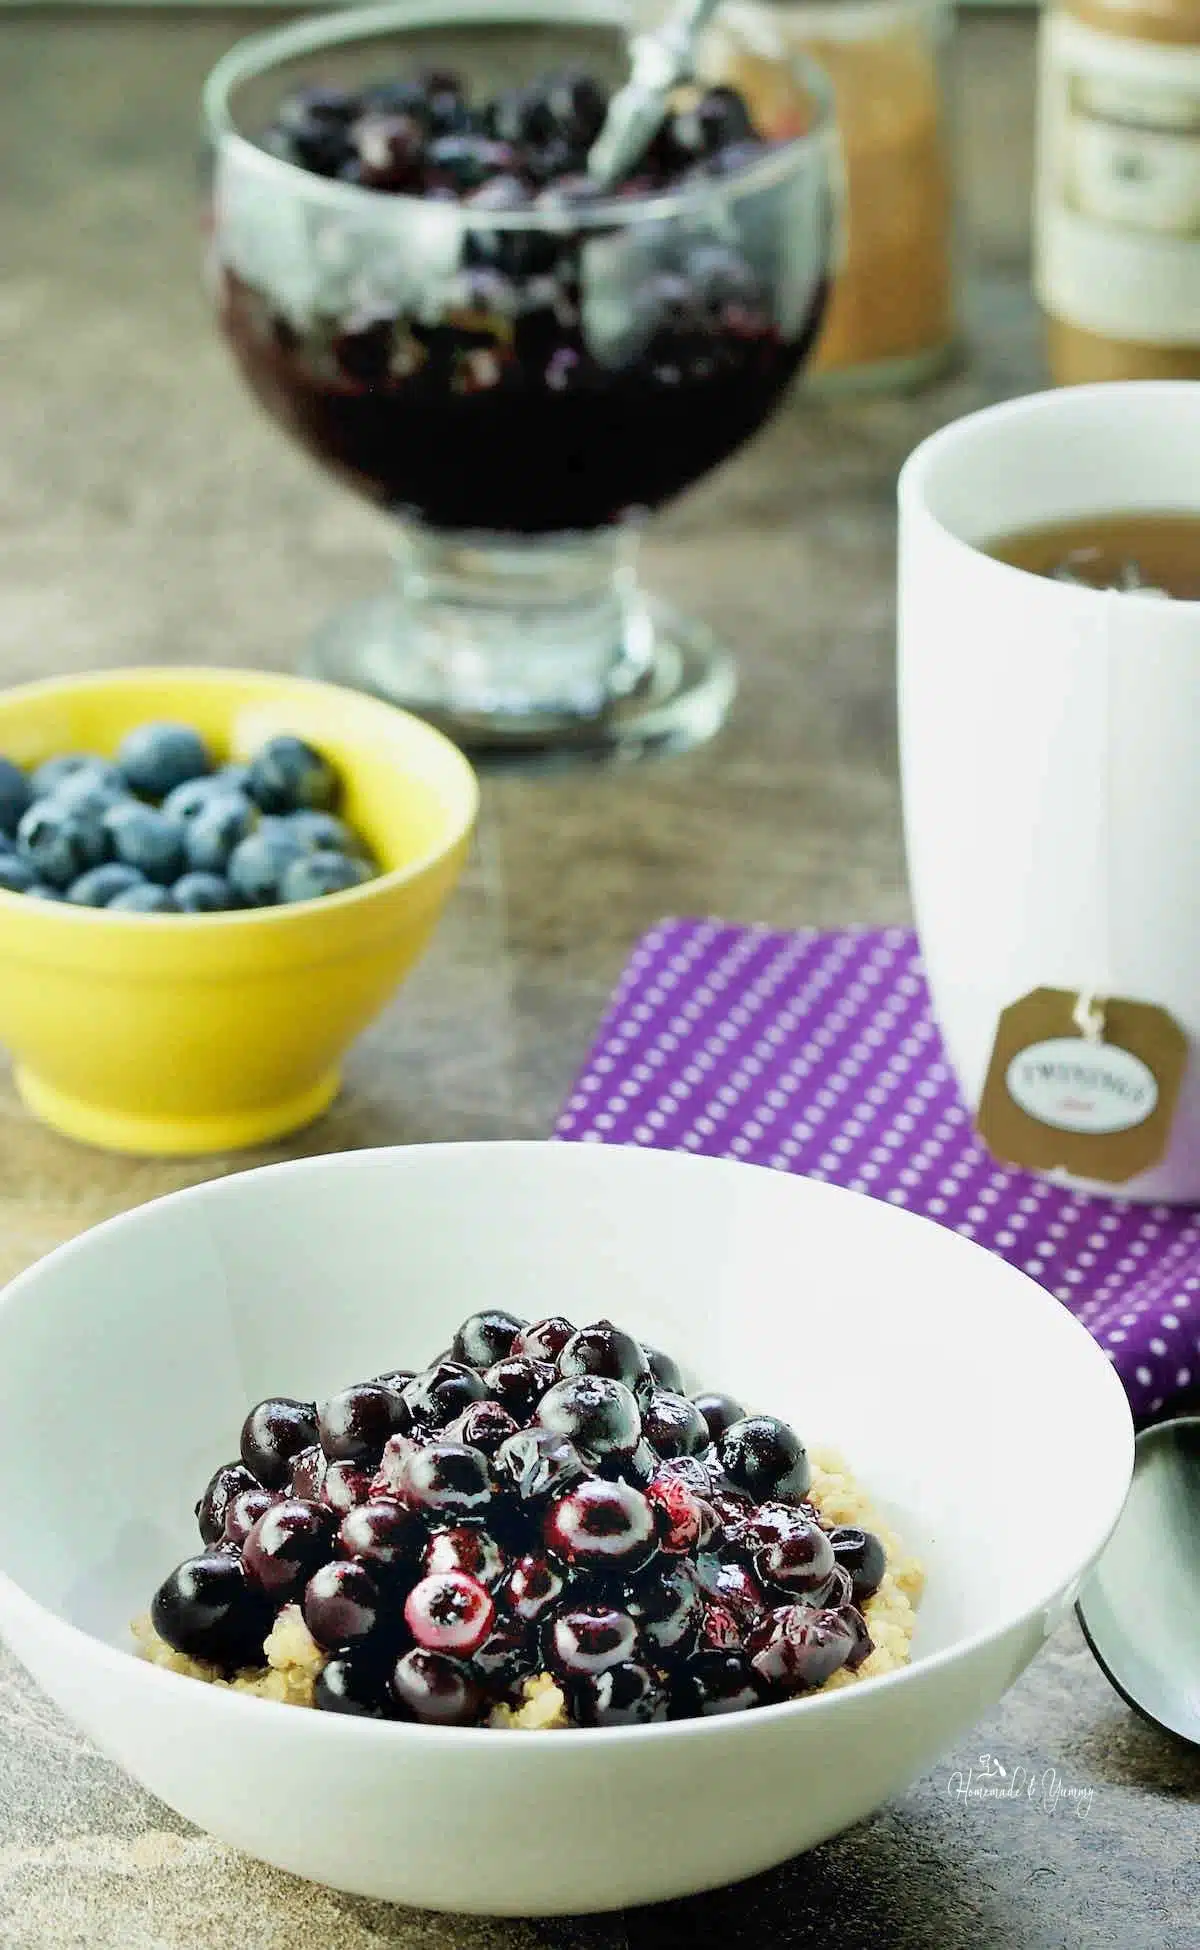 Roasted blueberry and quinoa breakfast bowl.